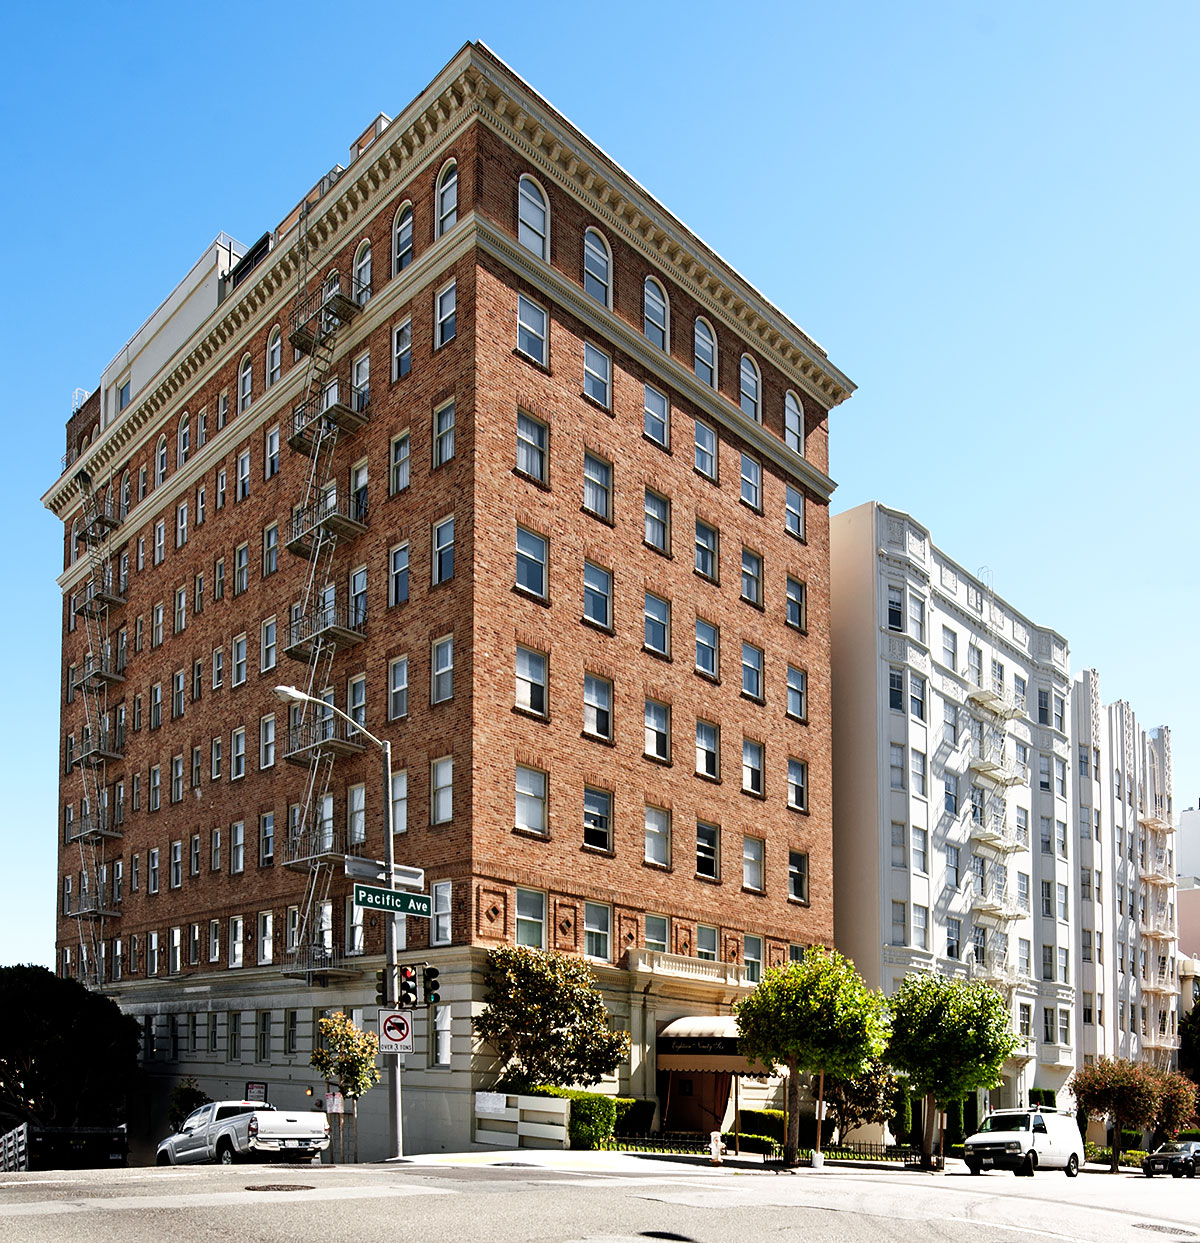 1896 Pacific Avenue in Pacific Heights, designed by Edward E. Young, built 1924